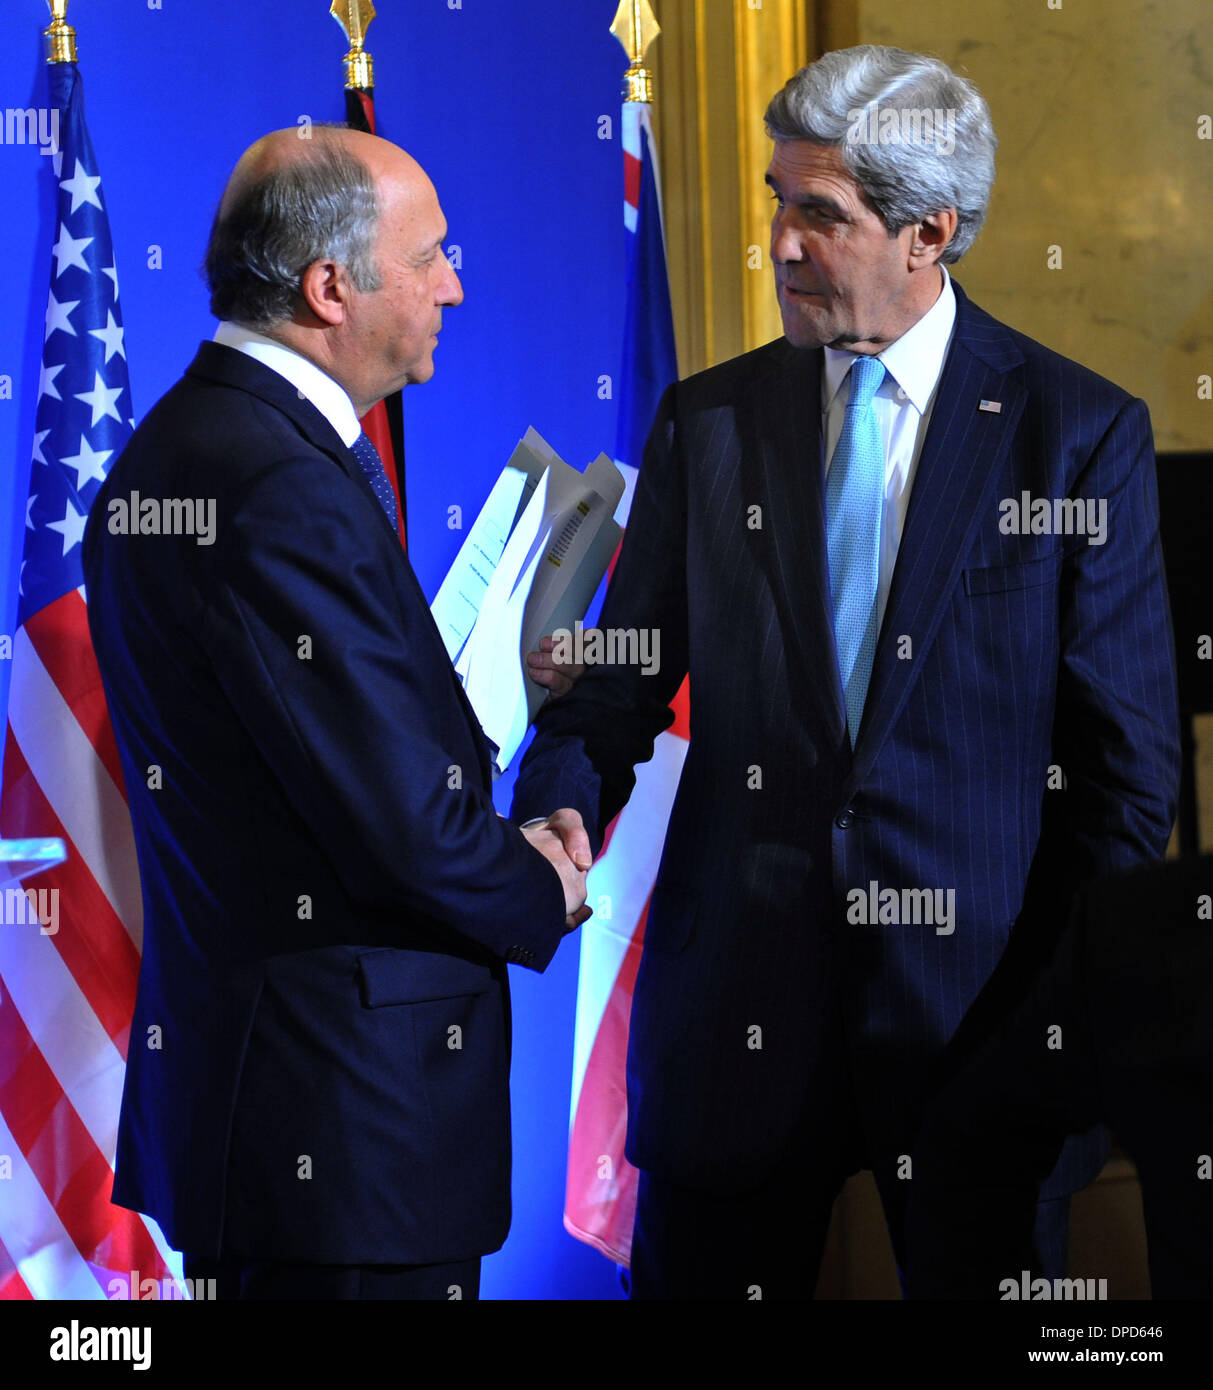 Paris, France. 12th Jan, 2014. French Foreign Affairs Minister Laurent Fabius (1st L) shakes hands with U.S. Secretary of State John Kerry after a news conference held at the French foreign ministry during a 'Friends of Syria' meeting ahead of Geneva II peace talks, in Paris, Jan. 12, 2014. Credit:  Chen Xiaowei/Xinhua/Alamy Live News Stock Photo